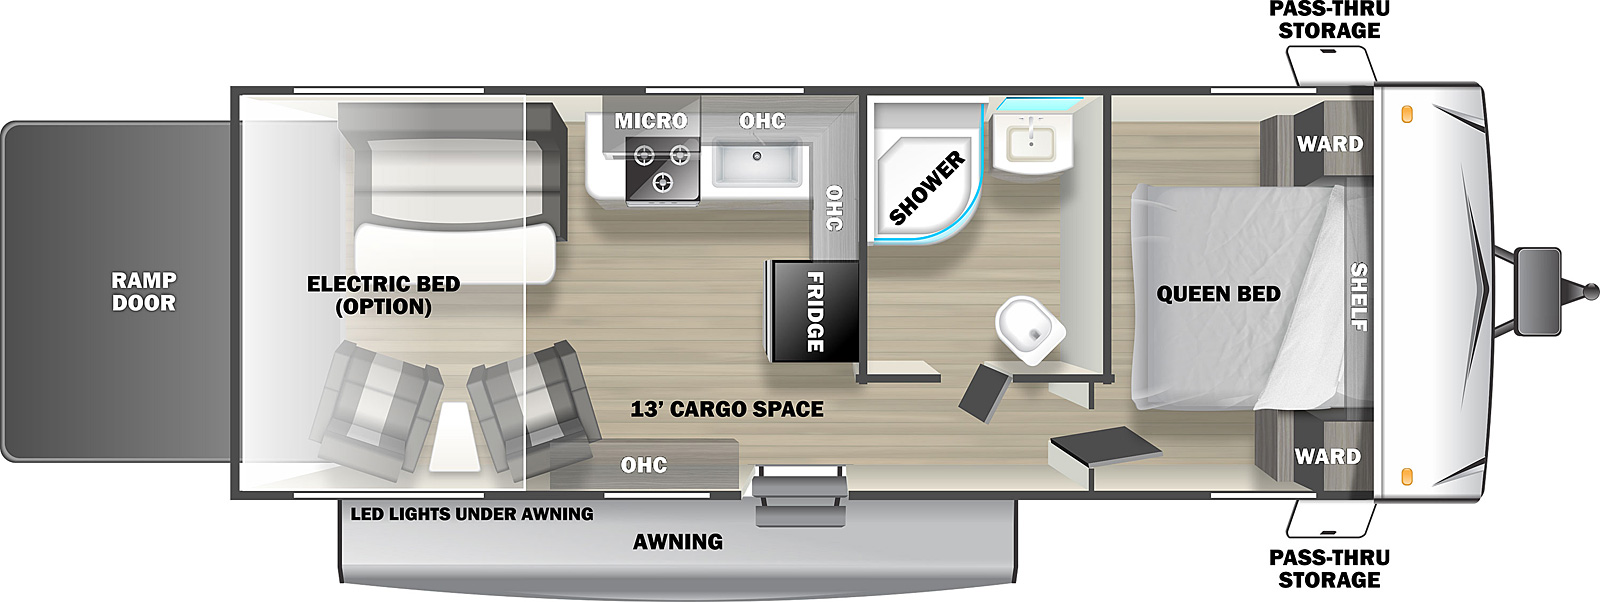 Stealth FQ2413 floorplan. The FQ2413 has no slide outs and one entry door.